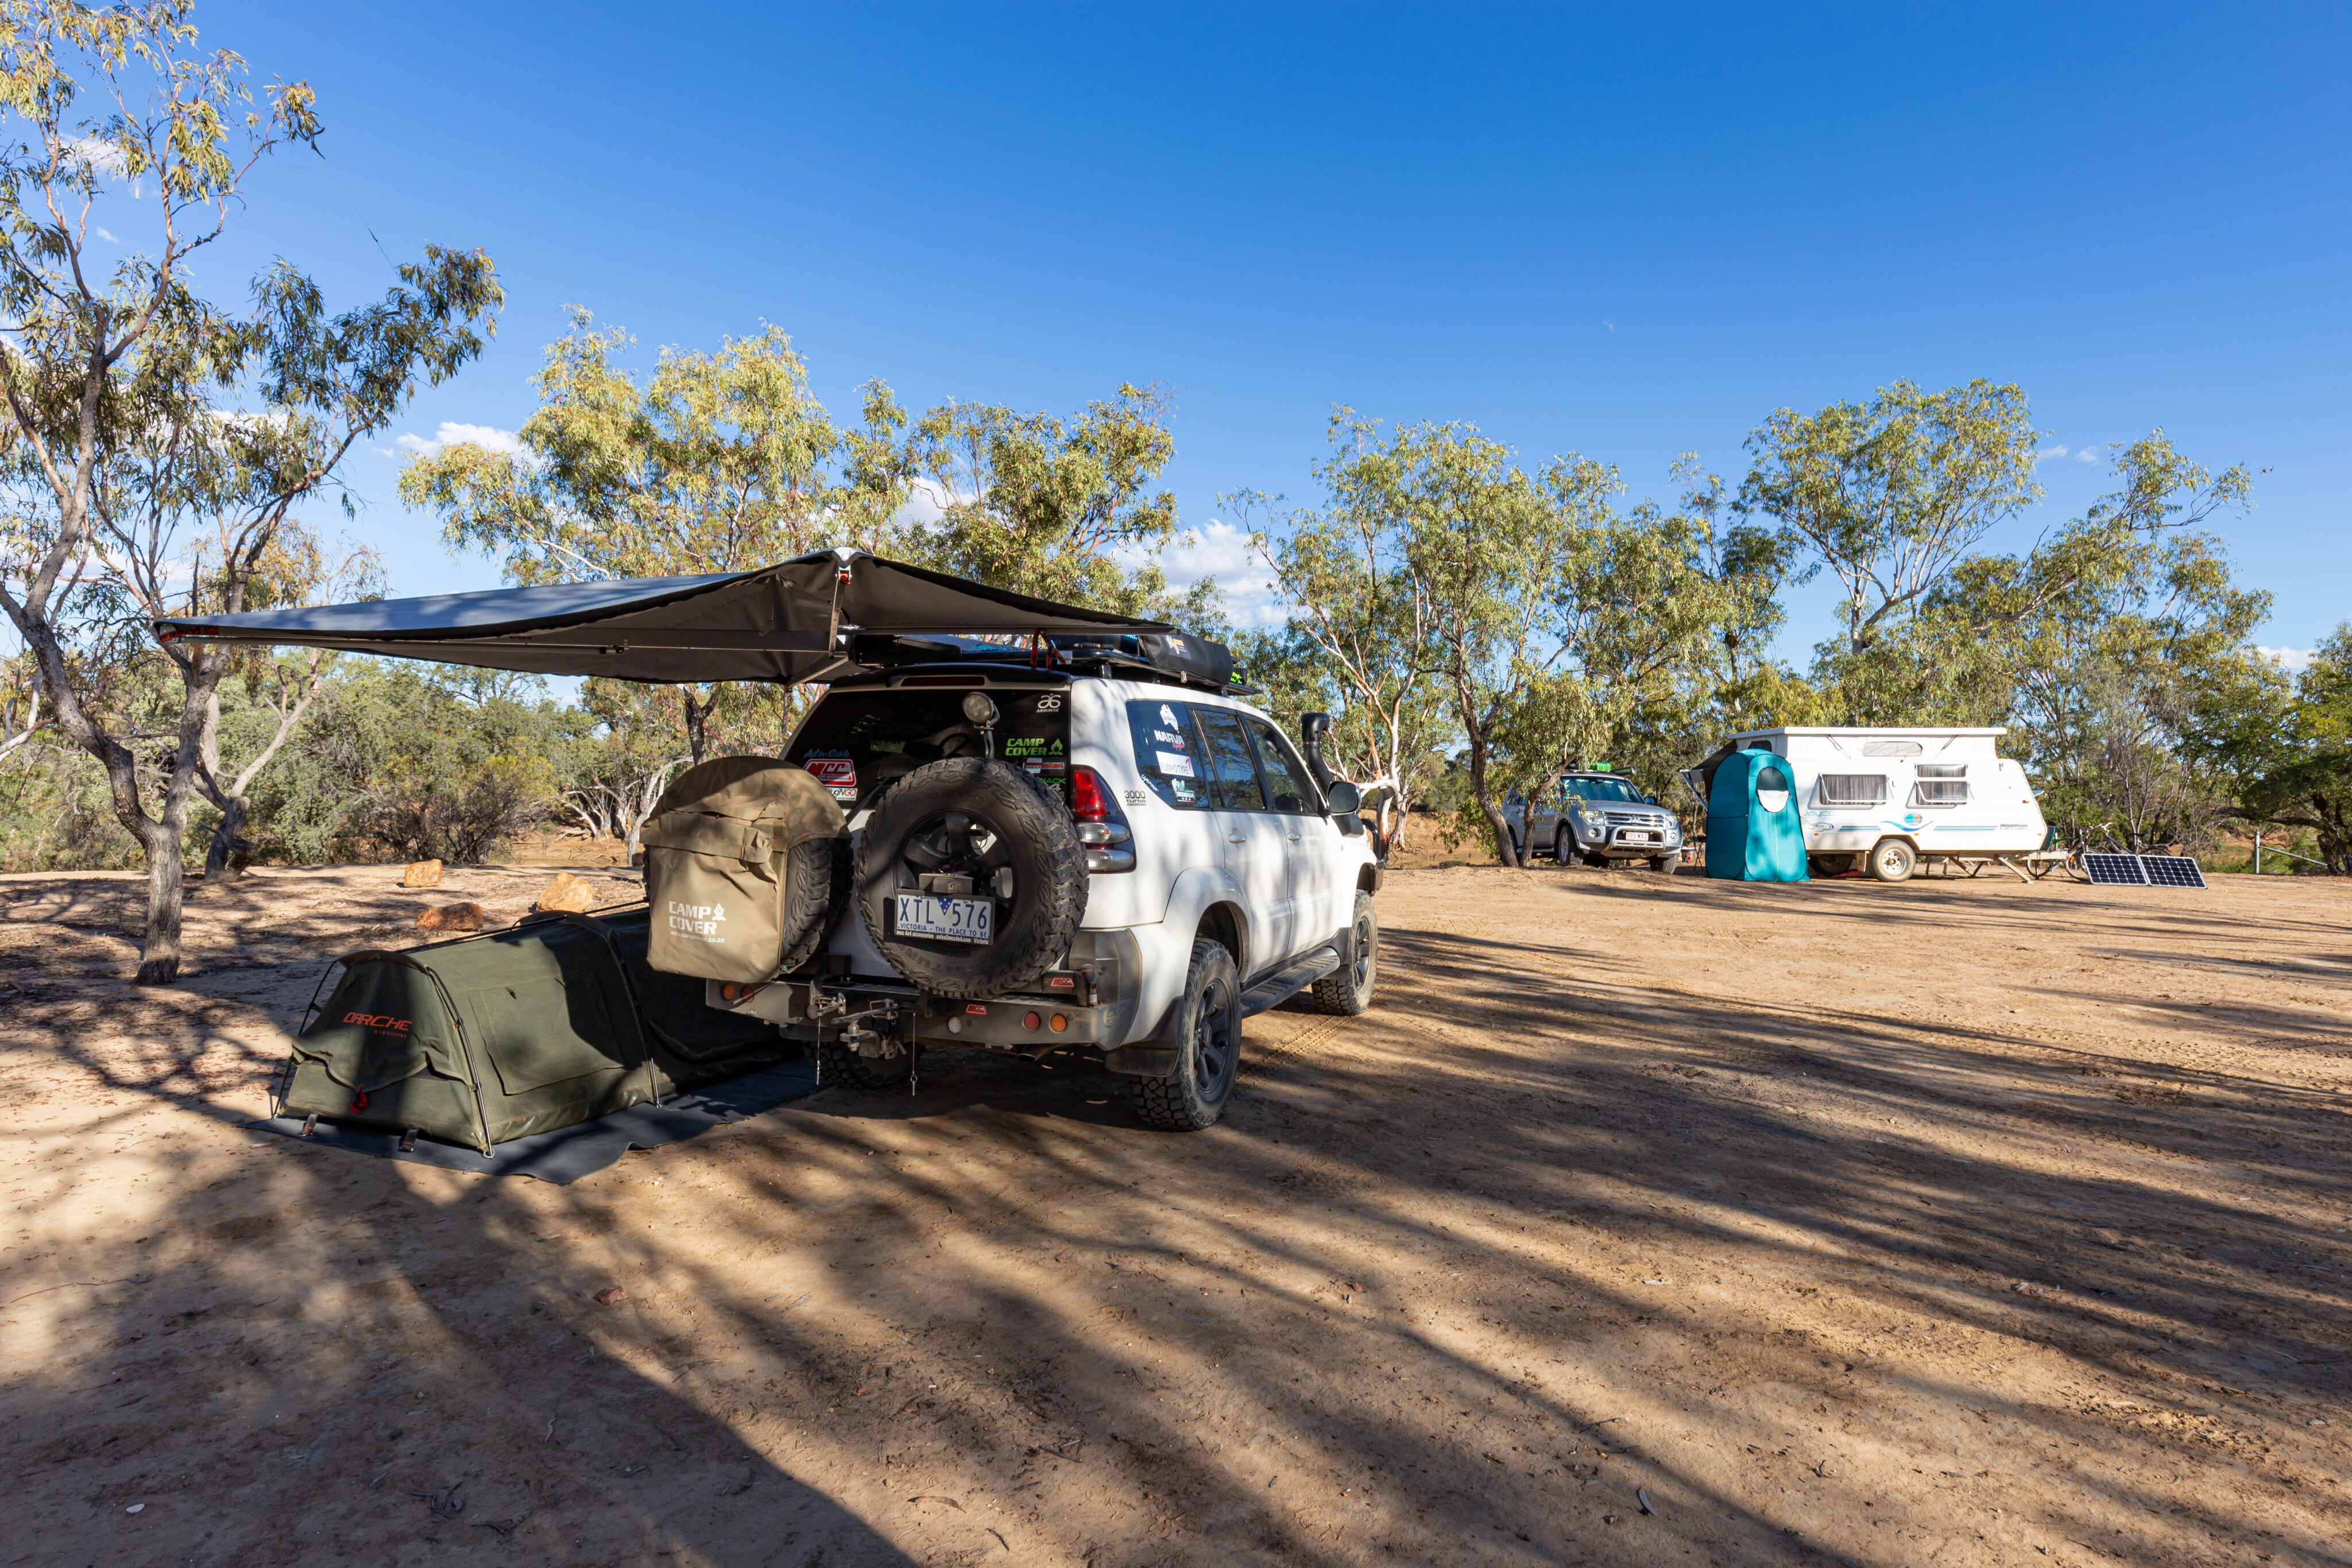 8d482b6b/explore queensland welford np bookings for camp sites must be made online prior to arriving jpg